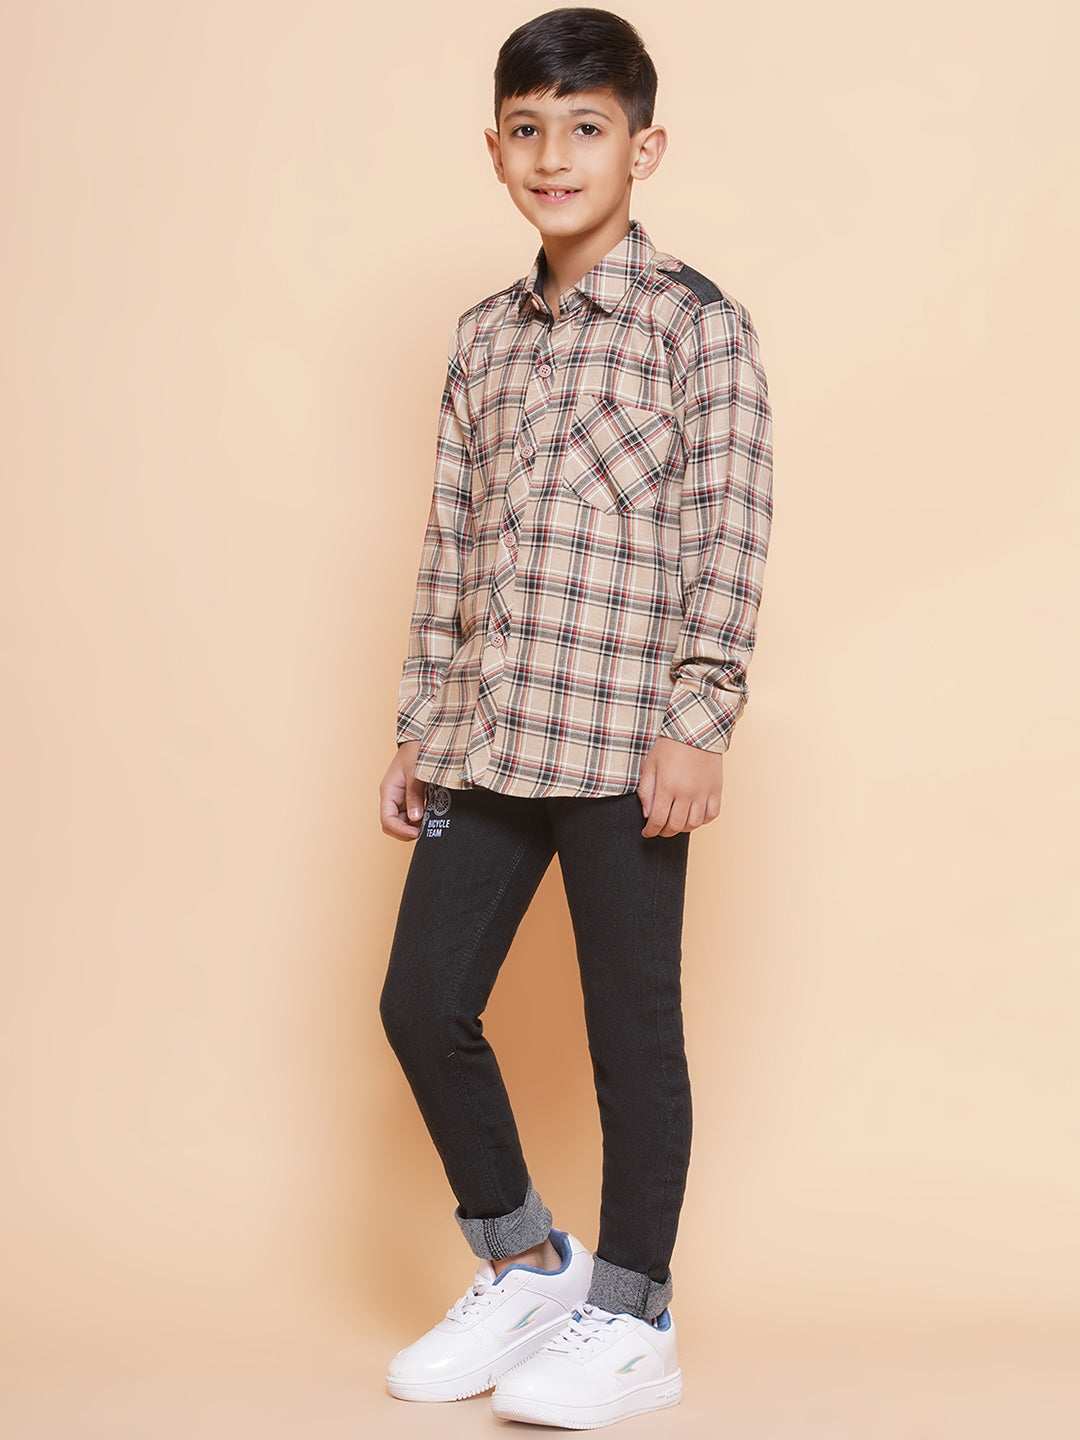 Kids Beige Shirt and Jeans Clothing Set For Boys